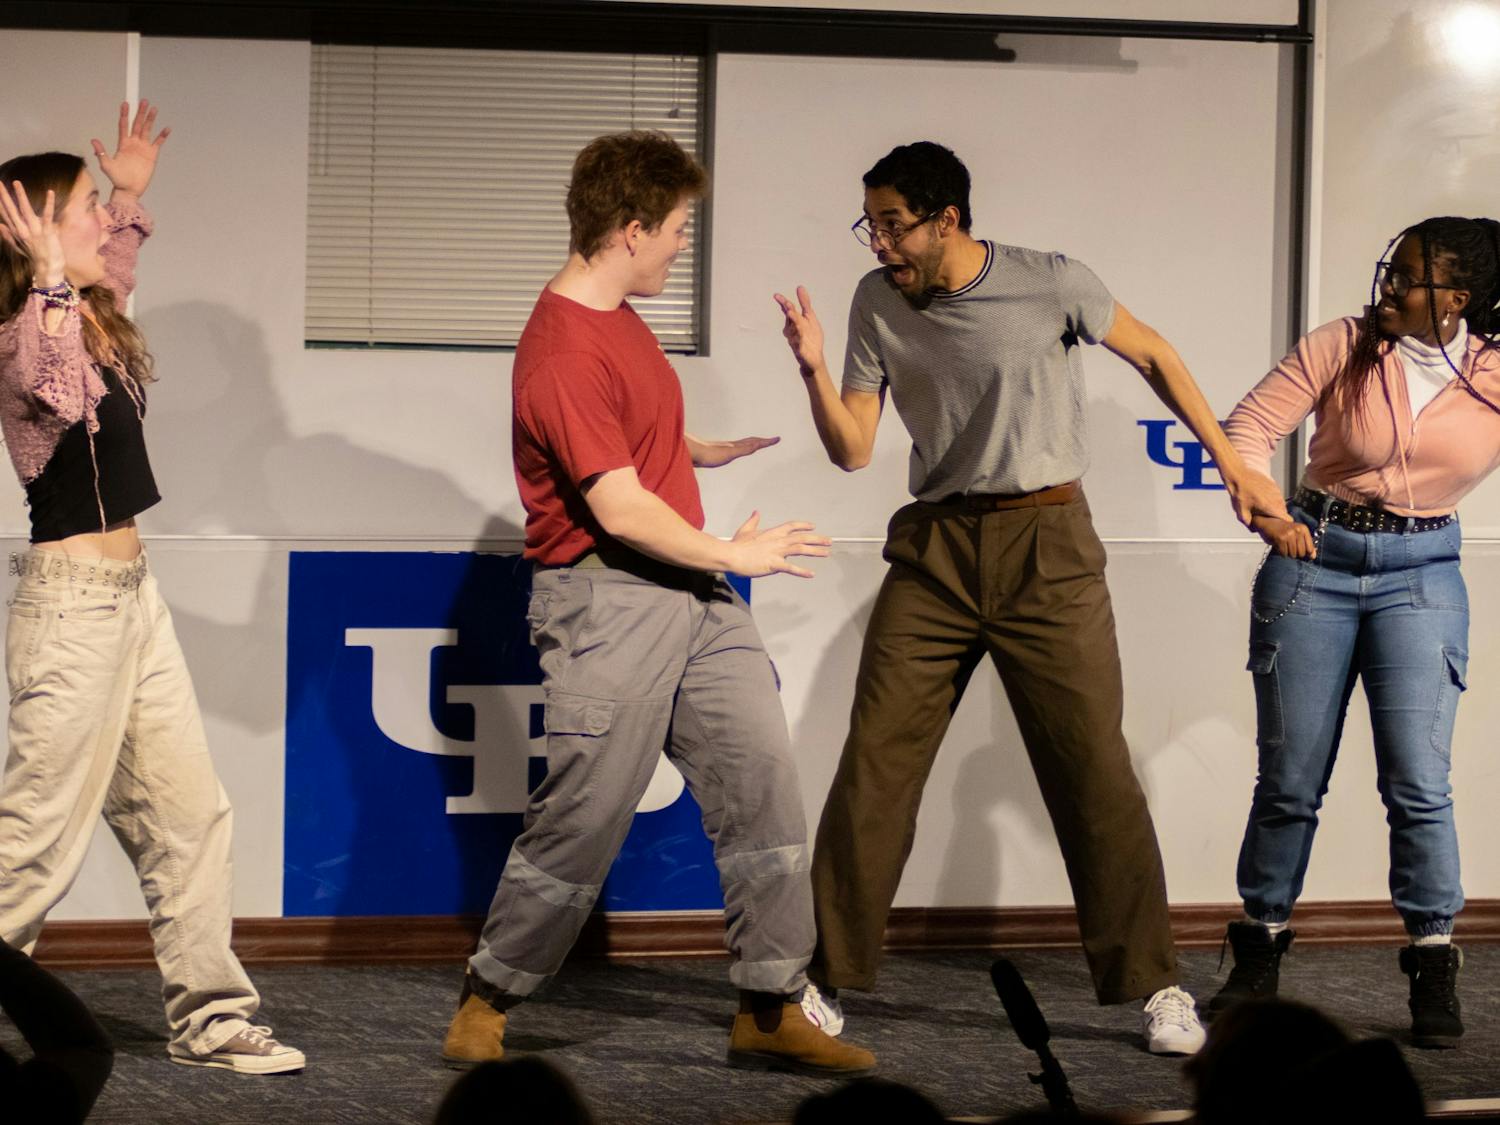 The UB Improv Club hosted a show, with three troupes performing, last Friday night in Student Union 330.&nbsp;